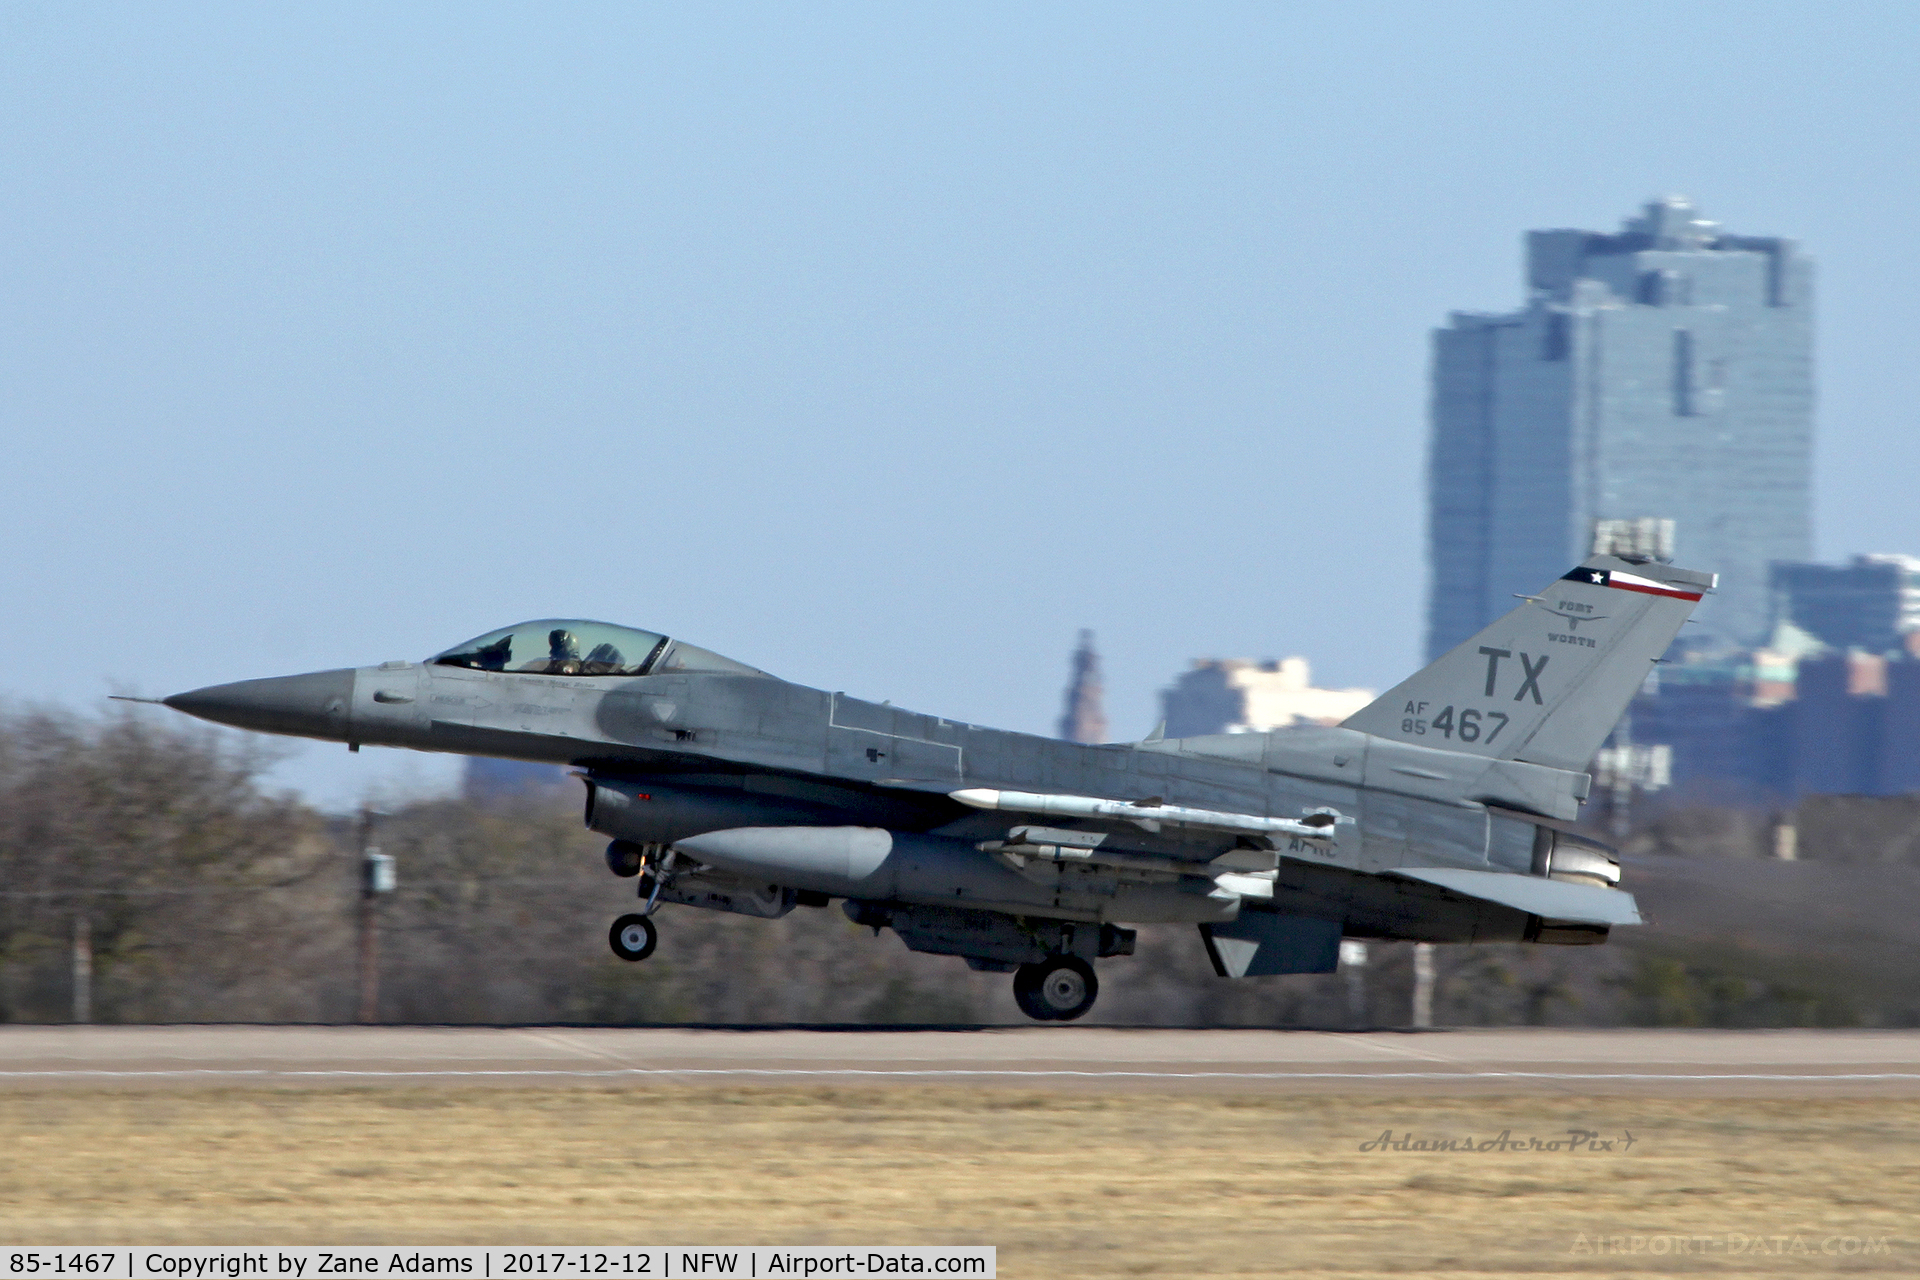 85-1467, 1986 General Dynamics F-16C Fighting Falcon C/N 5C-247, Arriving at NAS Fort Worth